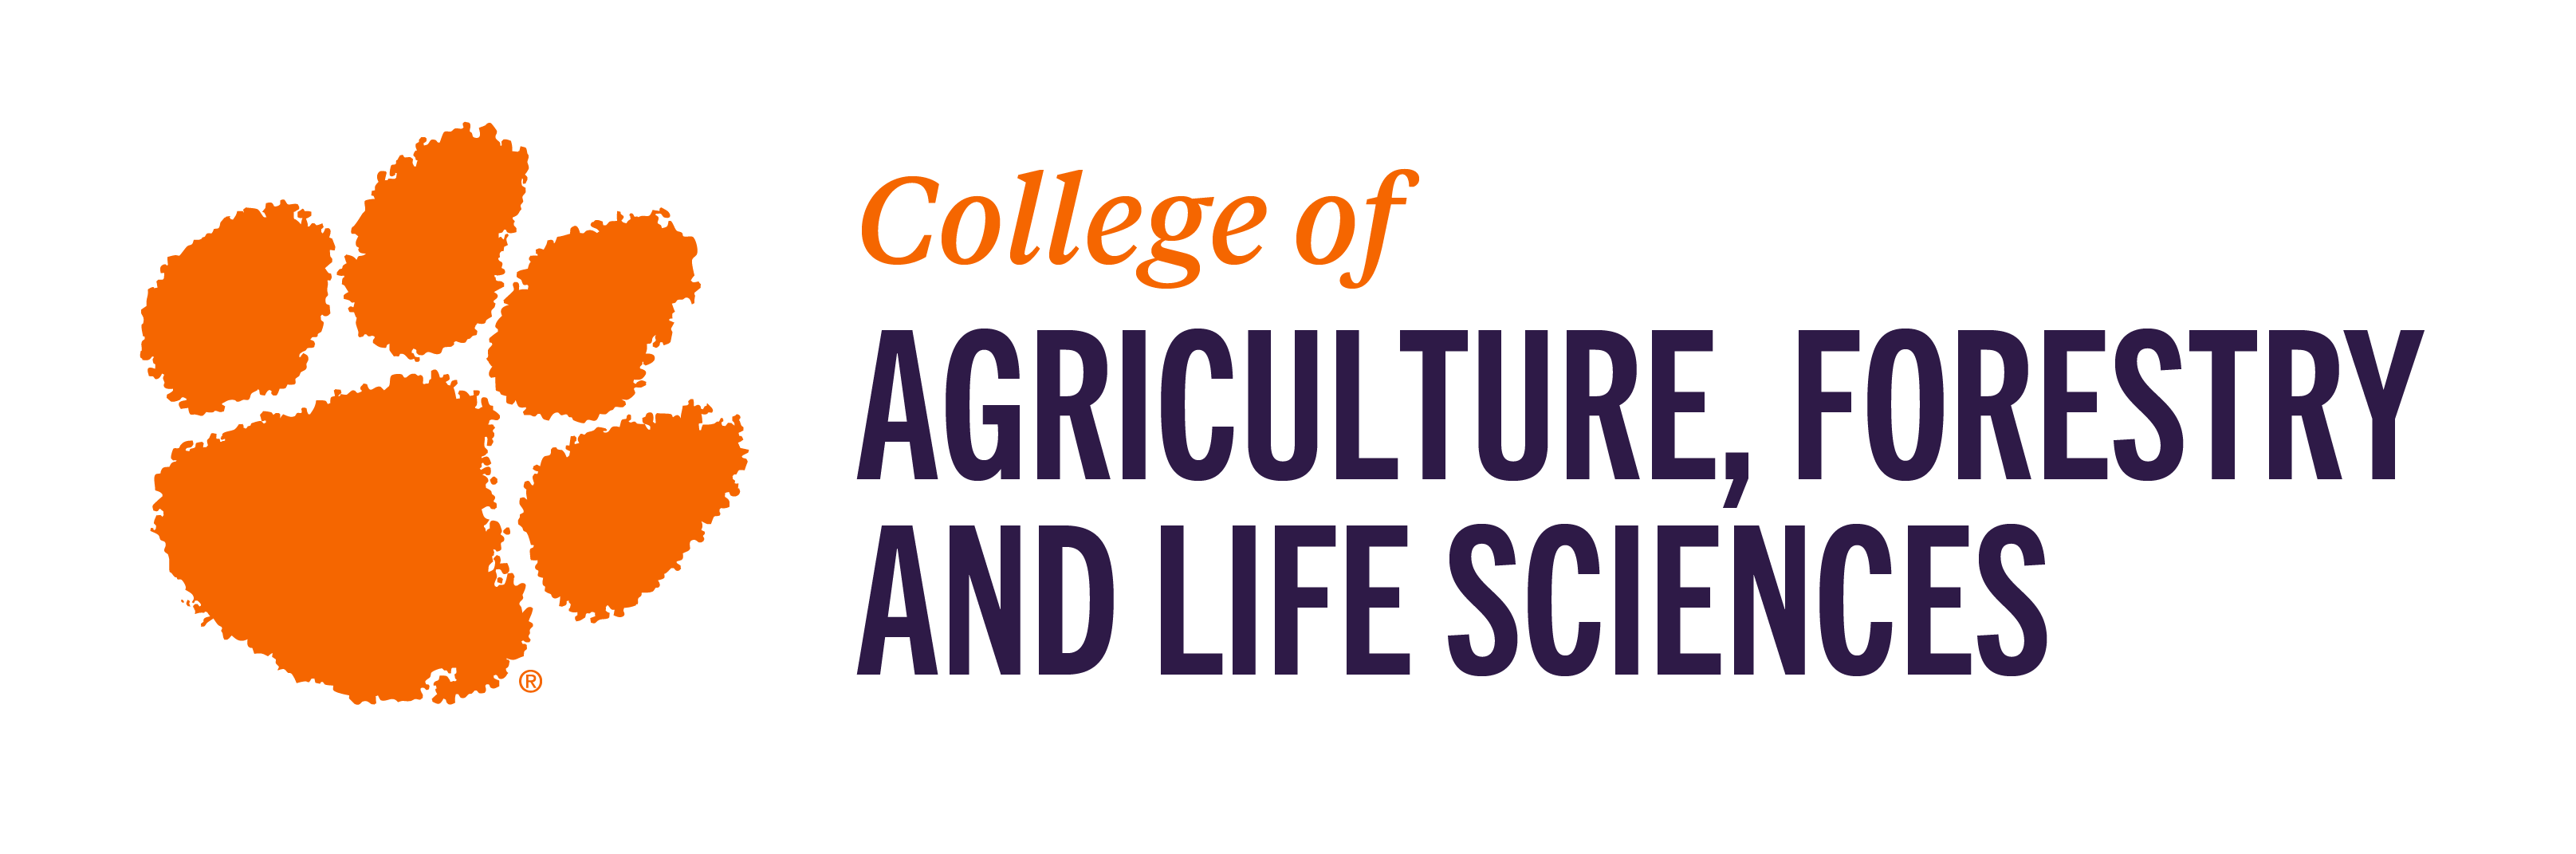 College of Agriculture Forestry and Life Sciences